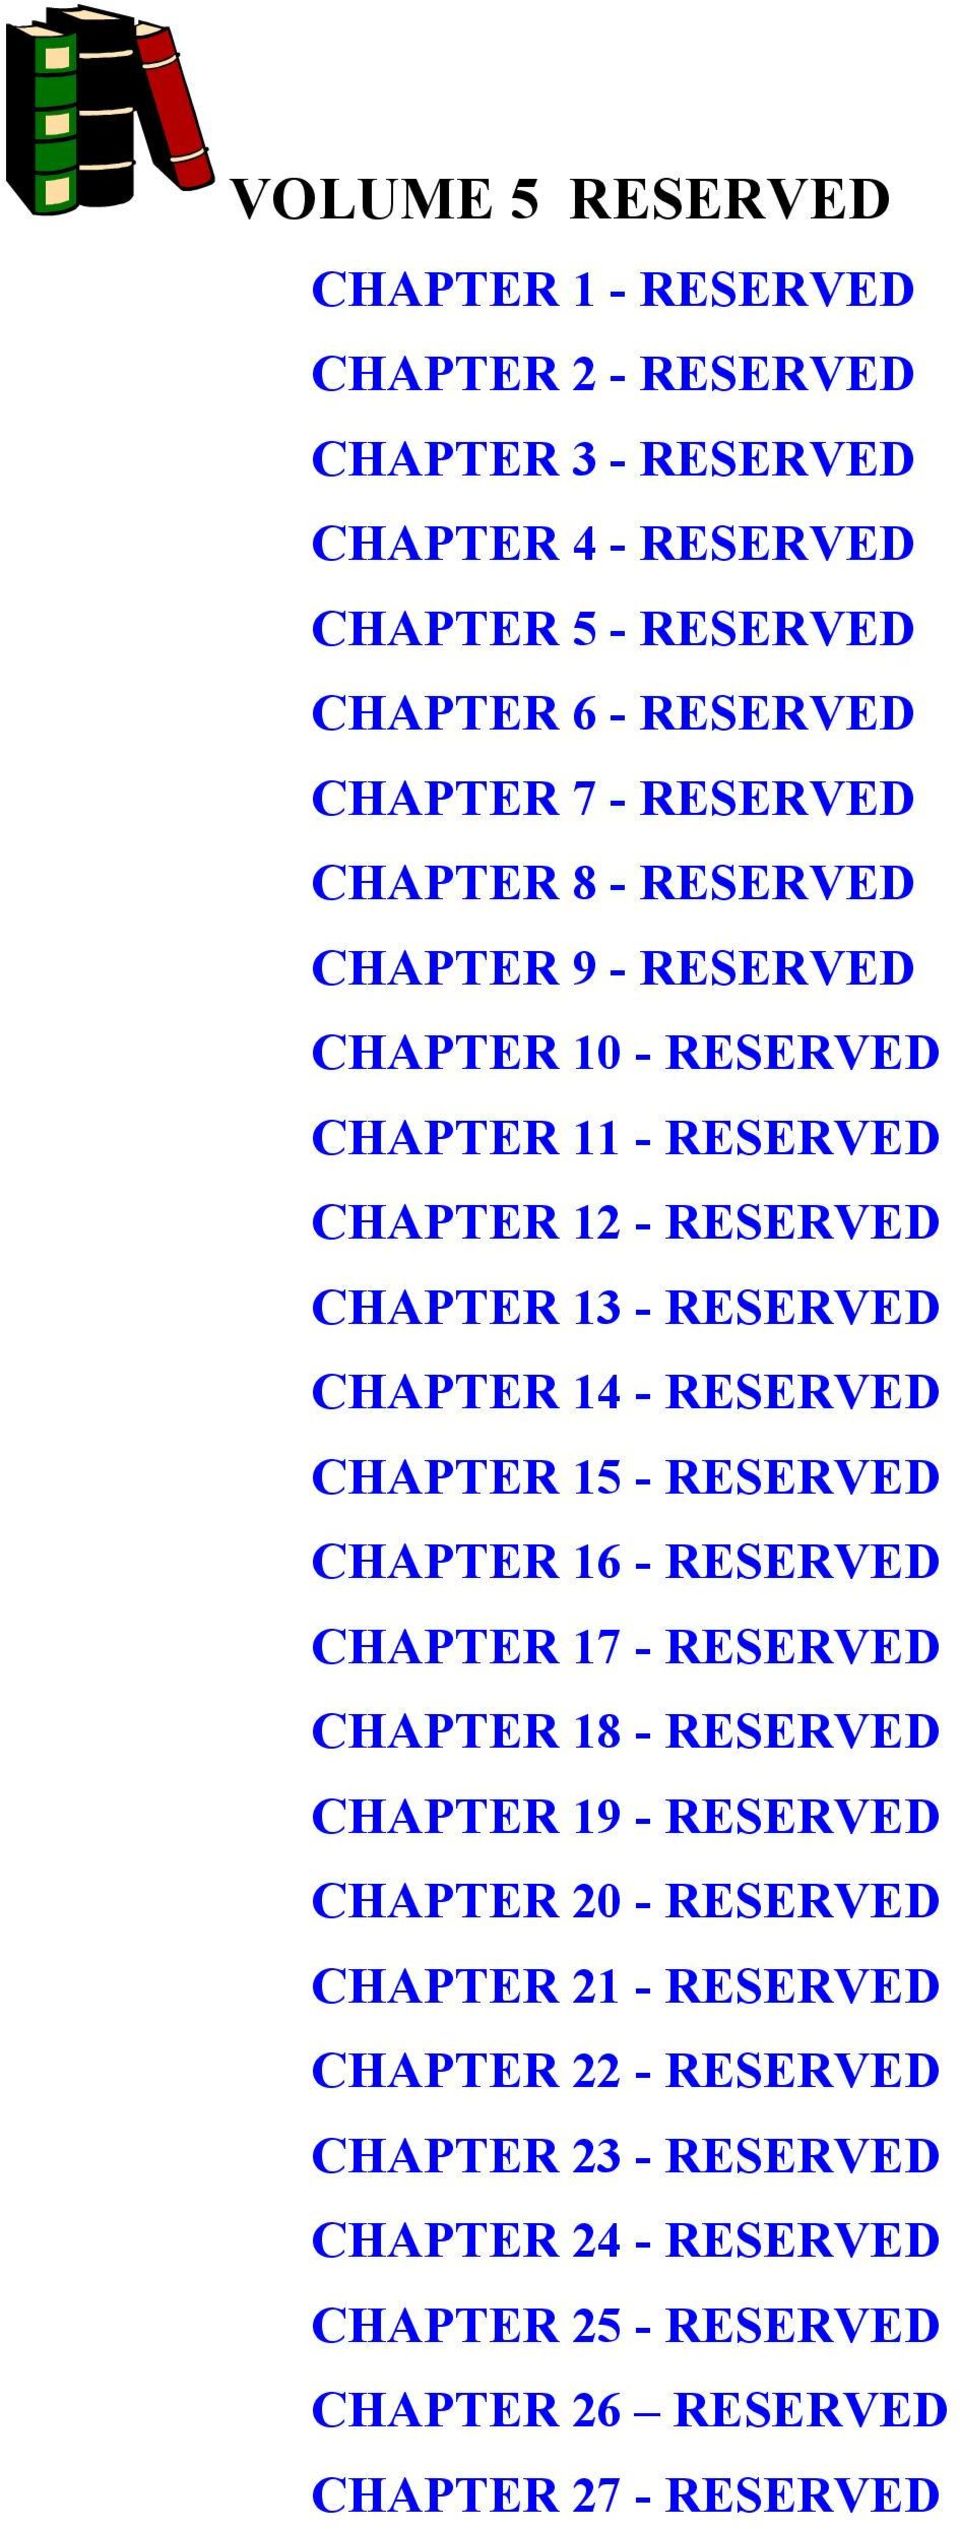 RESERVED CHAPTER 15 - RESERVED CHAPTER 16 - RESERVED CHAPTER 17 - RESERVED CHAPTER 18 - RESERVED CHAPTER 19 - RESERVED CHAPTER 20 - RESERVED